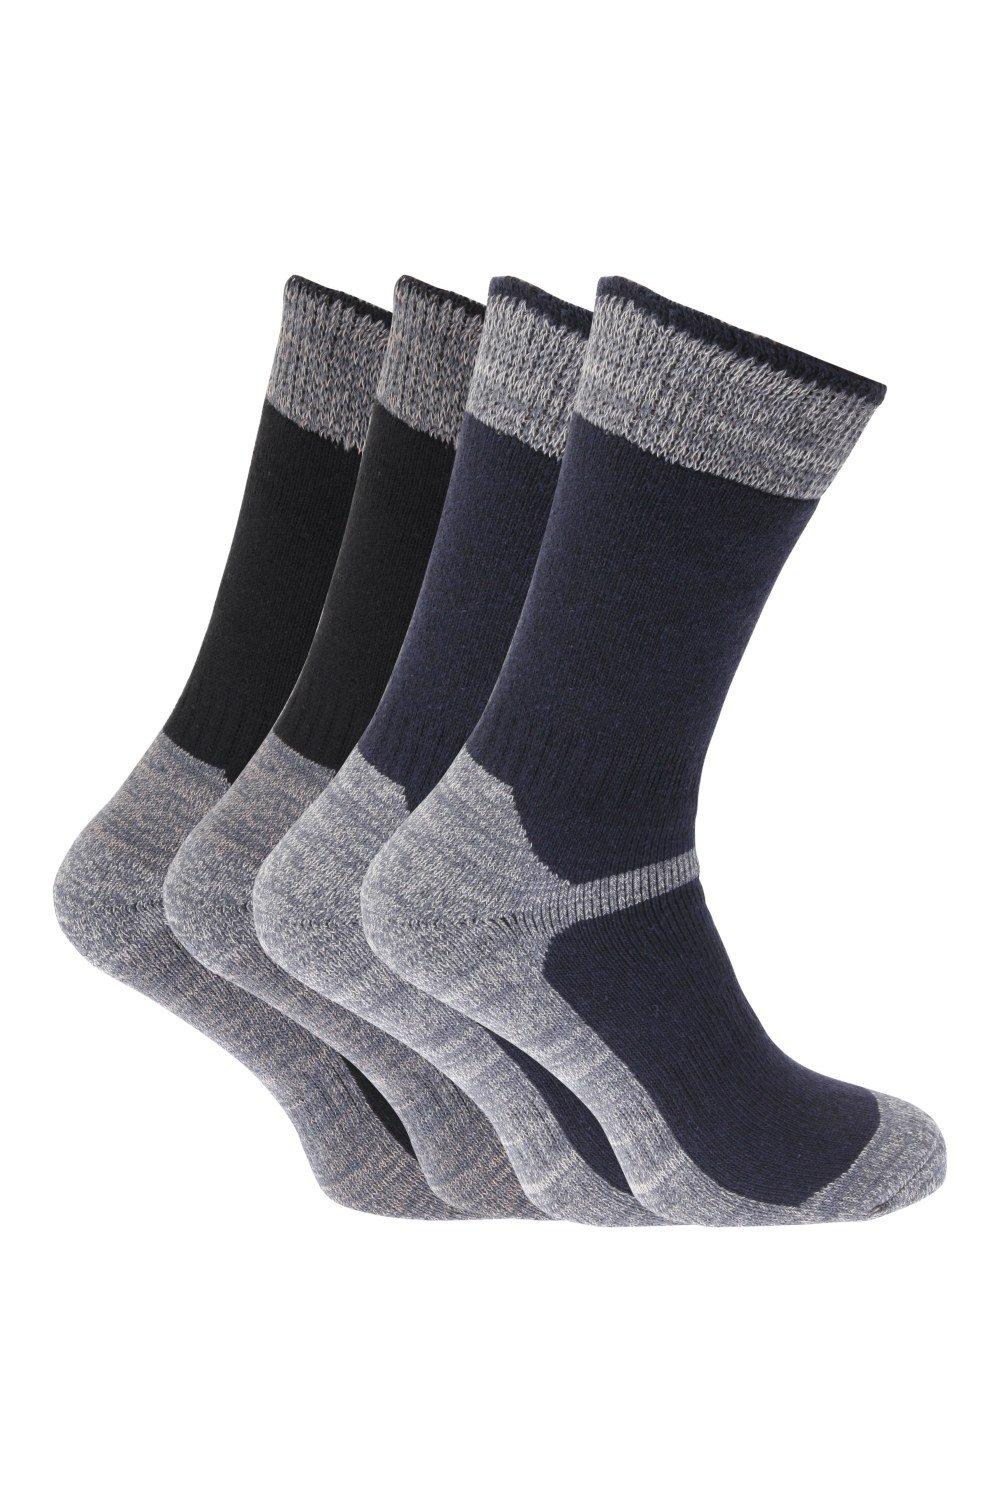 Heavy Weight Reinforced Toe Work Boot Socks (Pack Of 4)